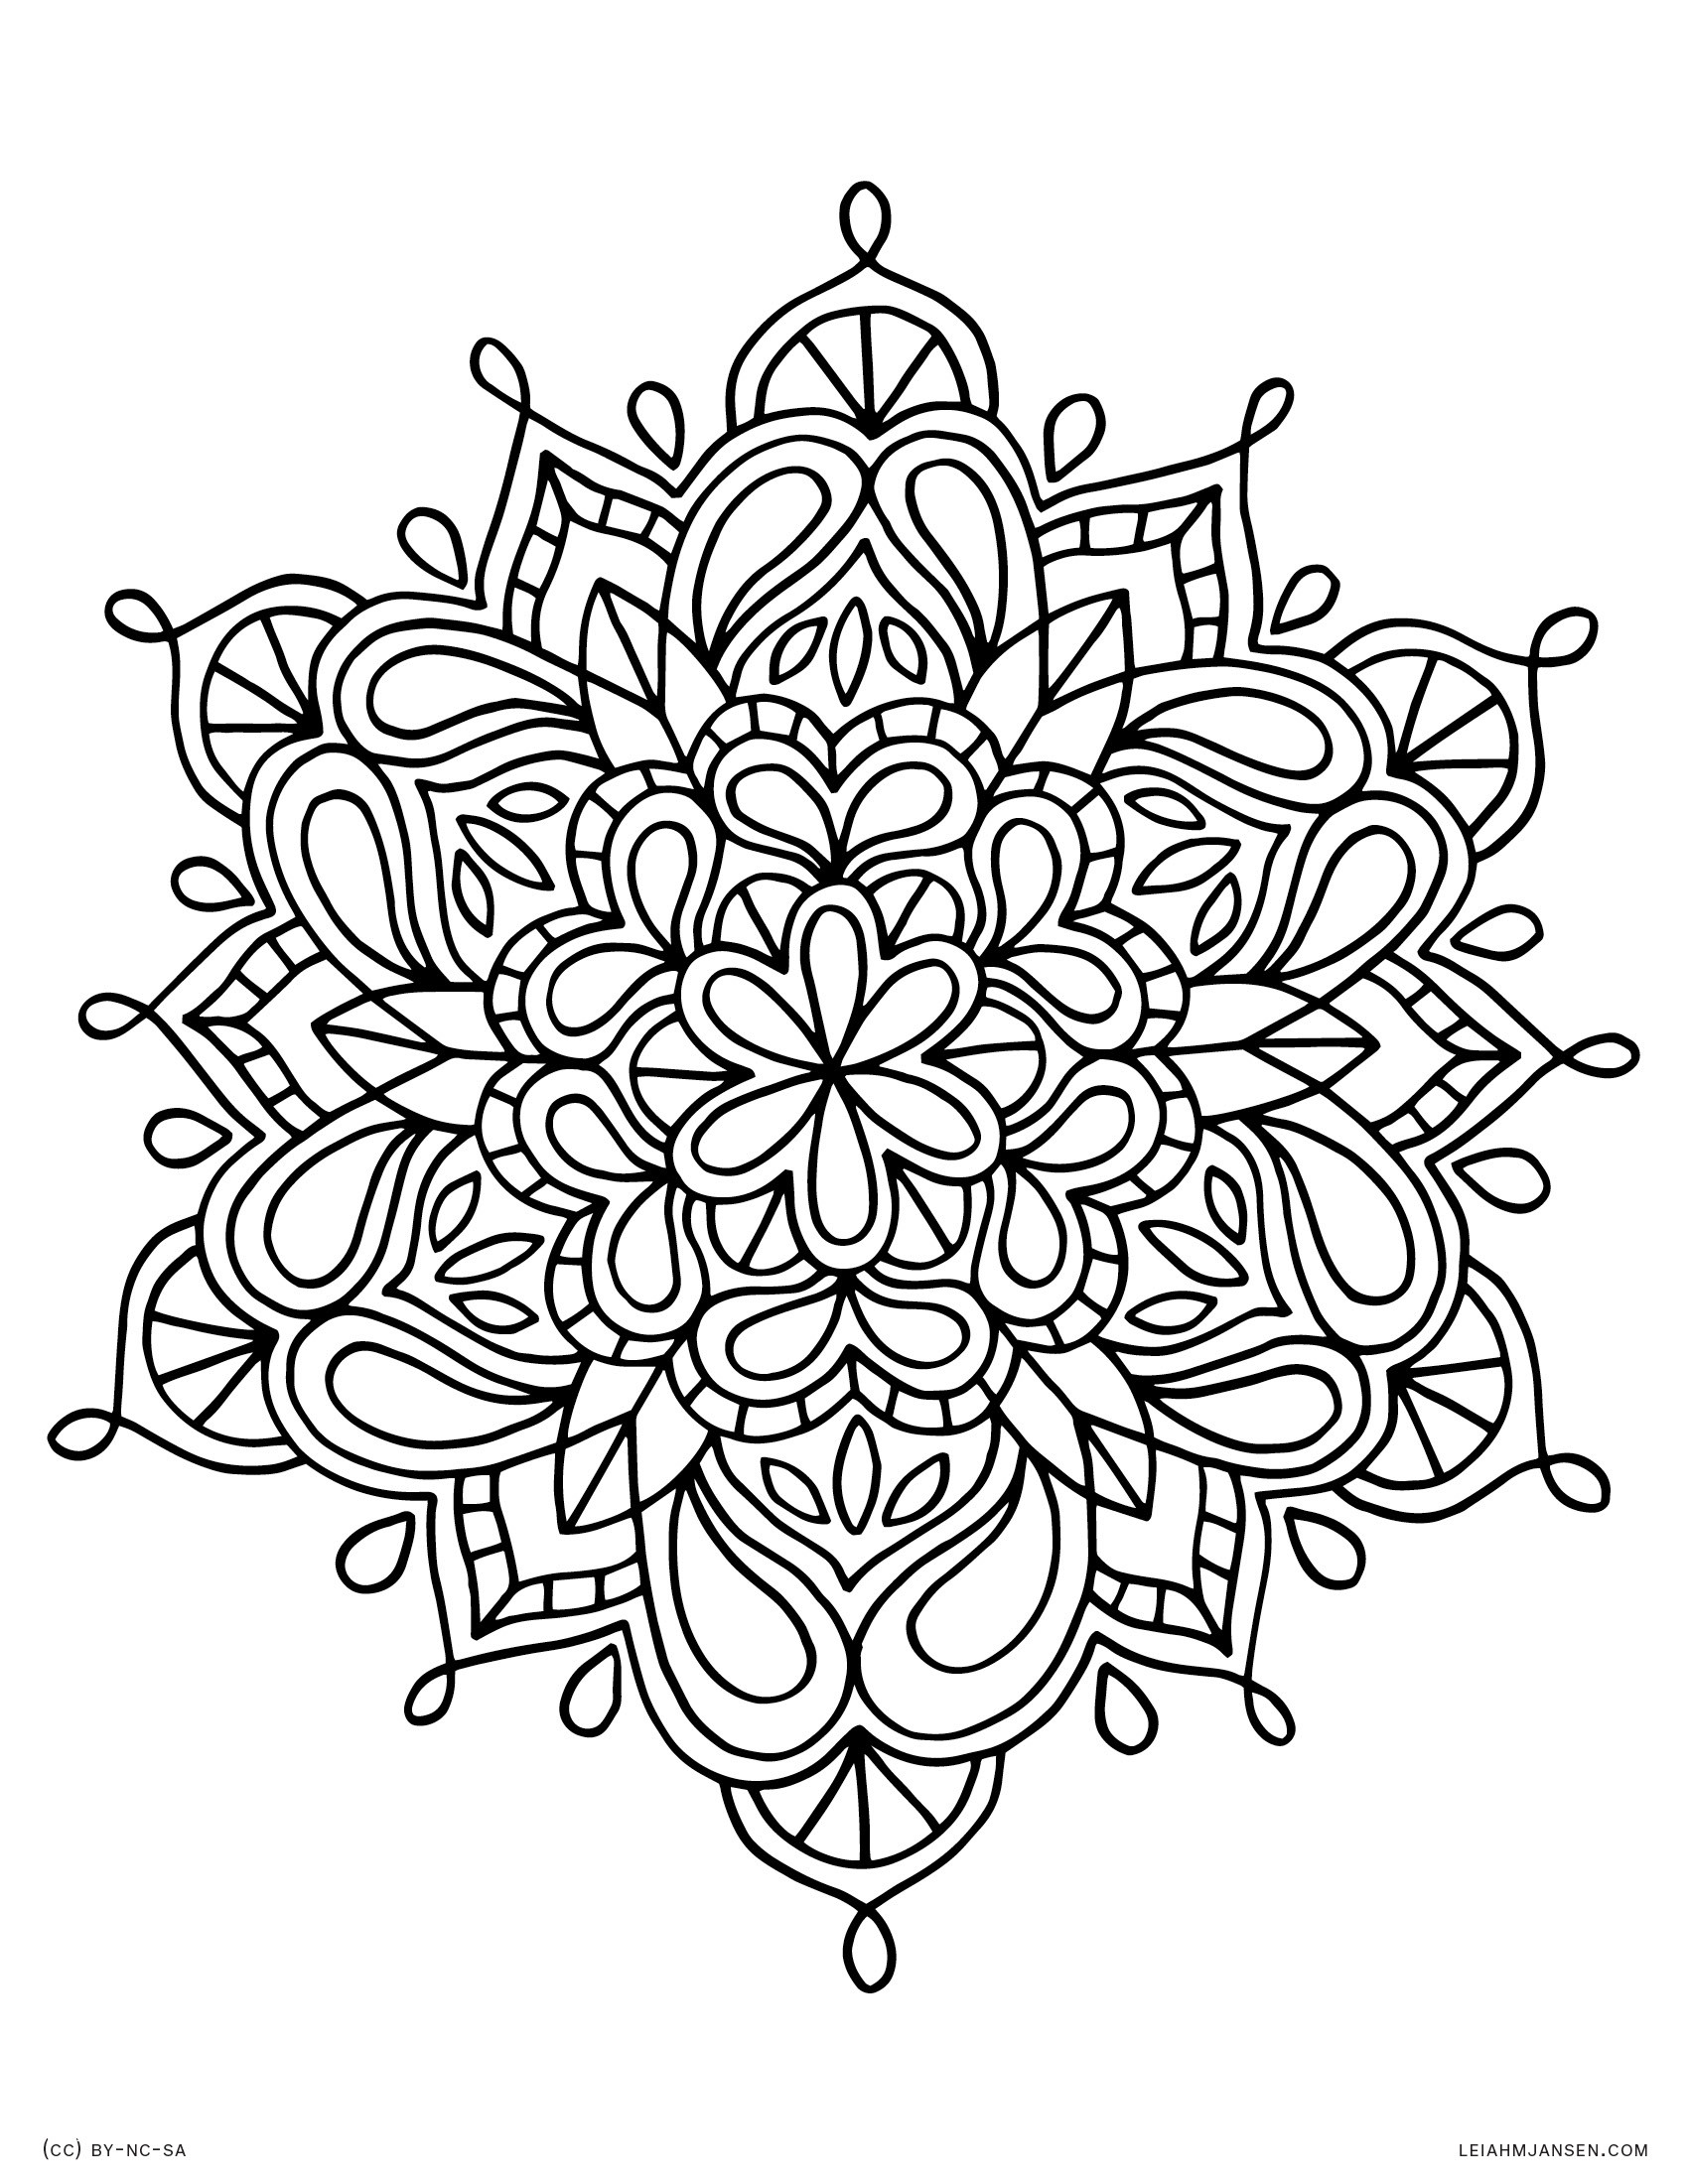 Intricate Designs Coloring Pages - Coloring Home